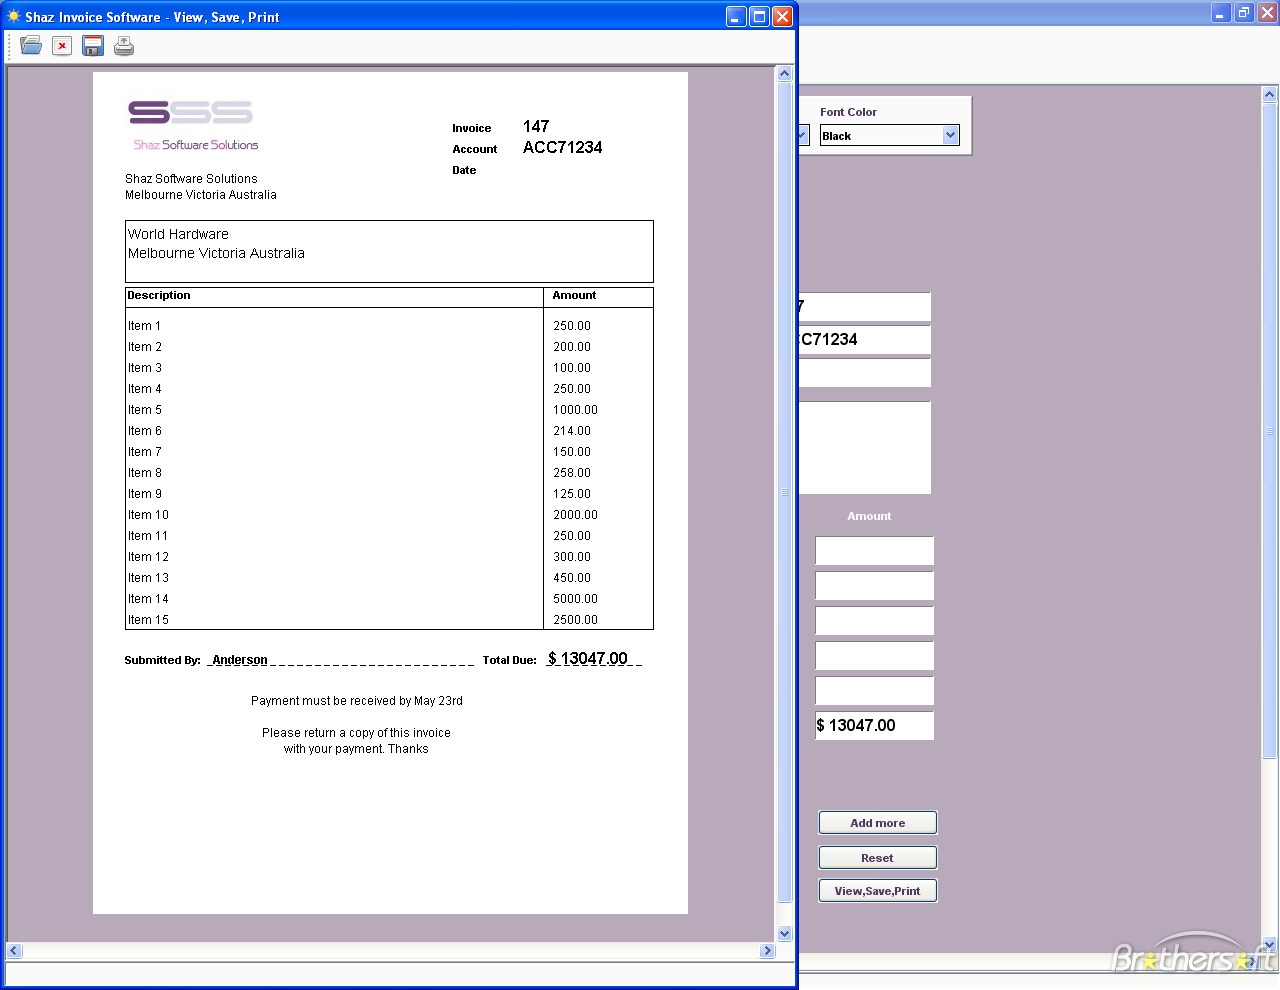 create invoice software download free shaz invoice software shaz invoice software 100 1280 X 990